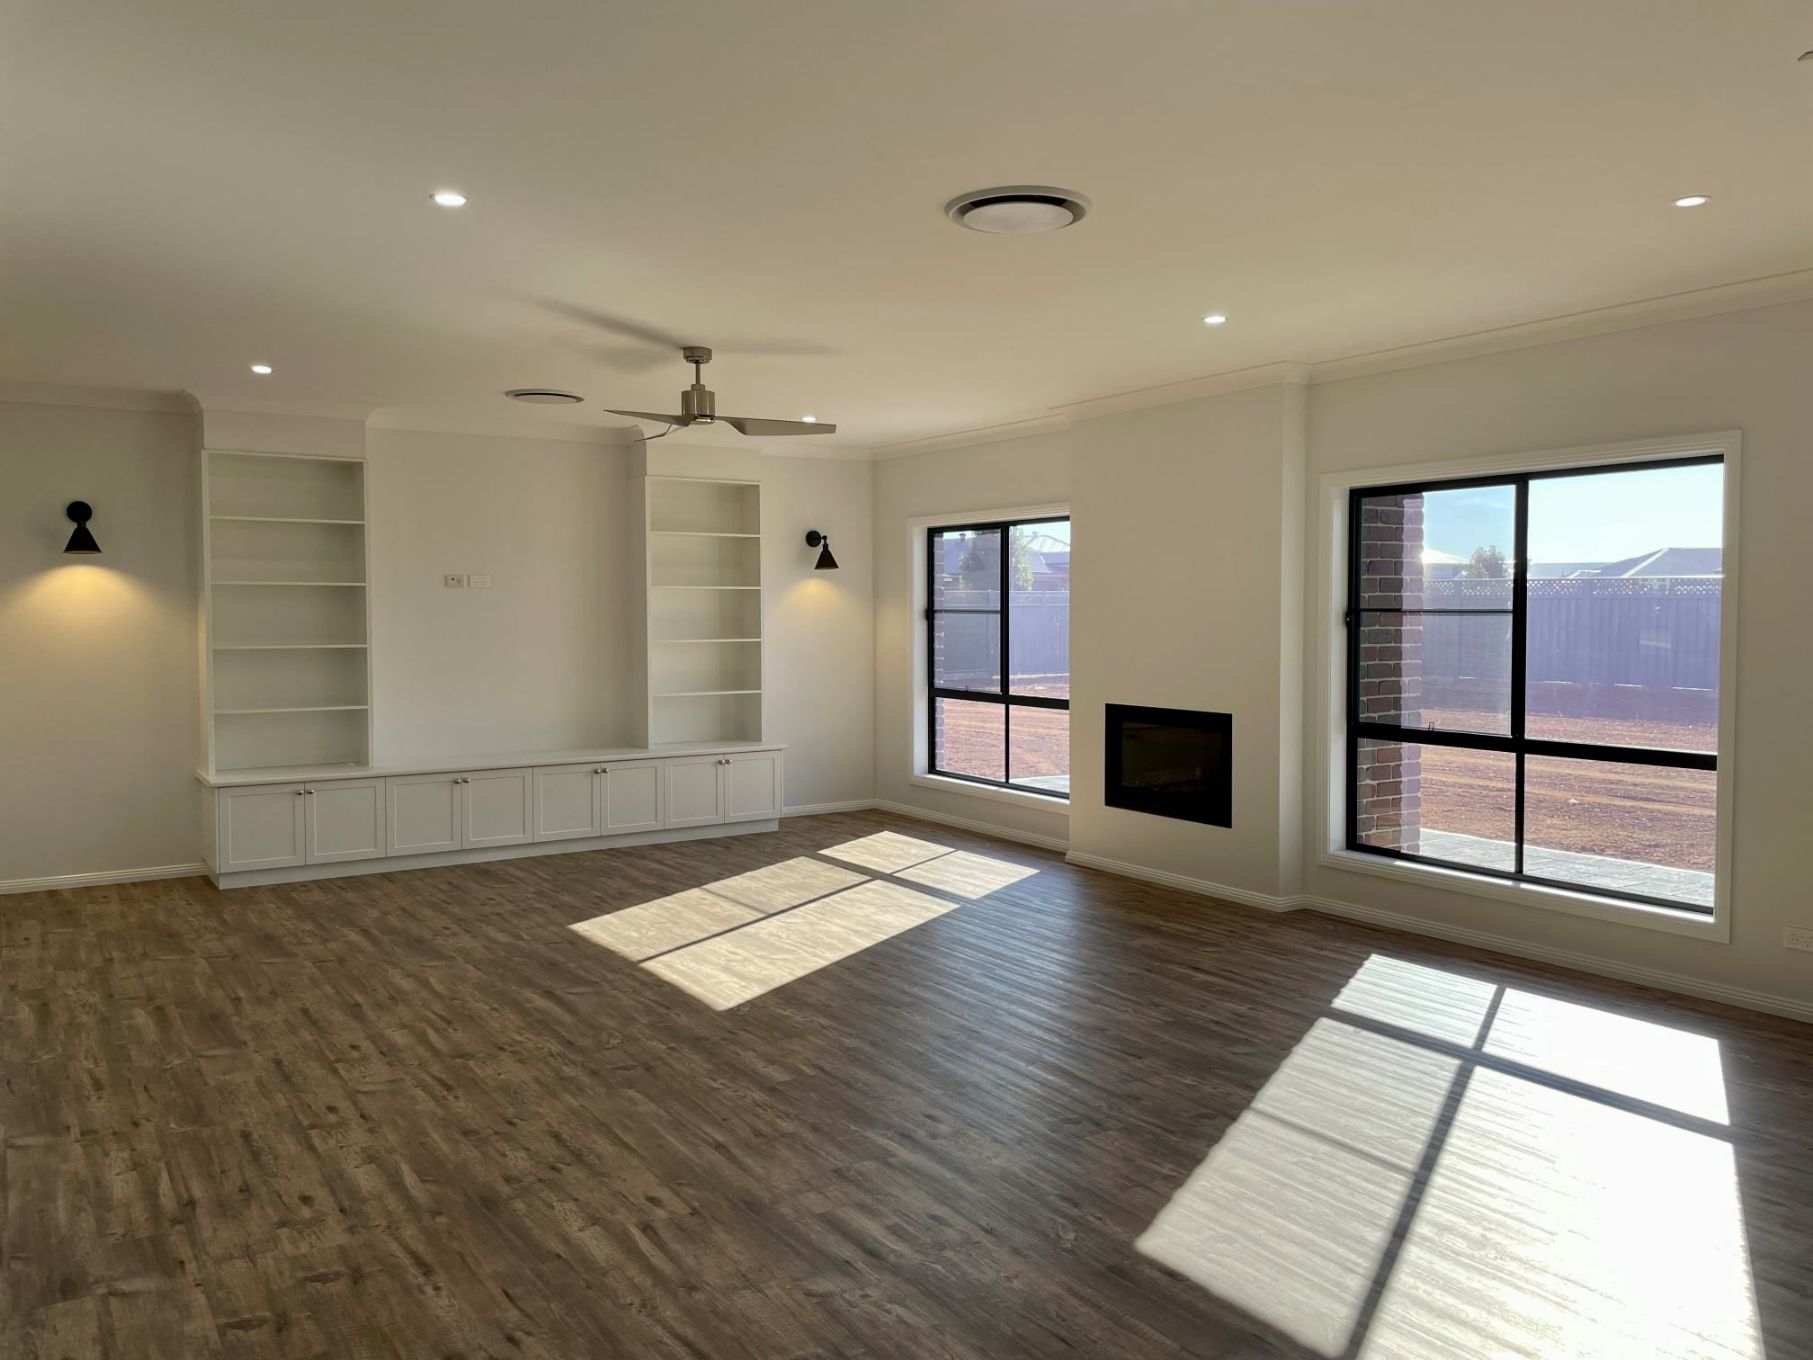 Living Room With Fireplace And Cabinet Shelves — Custom Design Homes in Dubbo, NSW